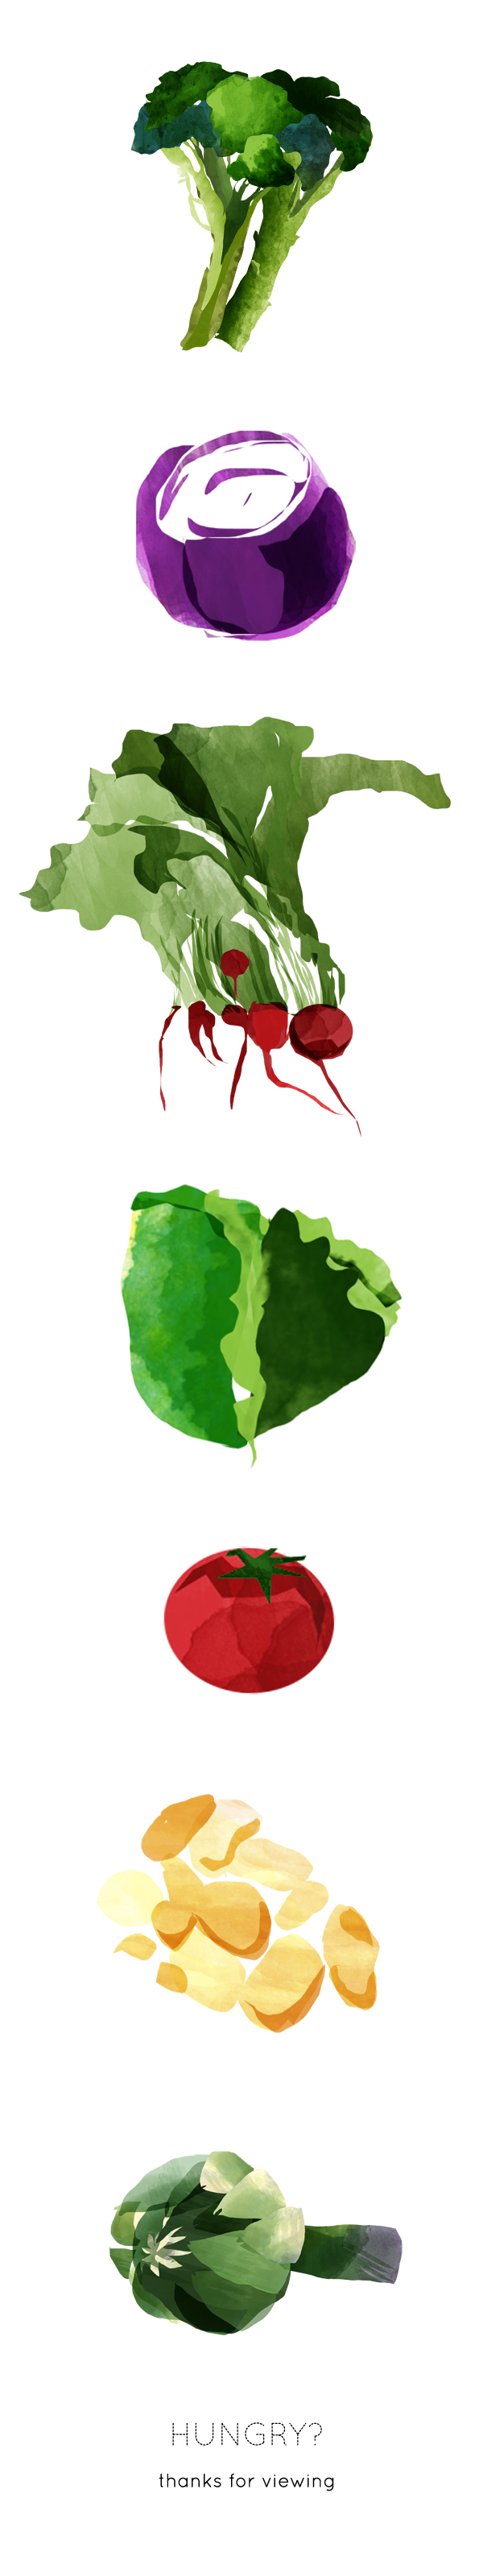 The Painted Vegetables Project on Behance